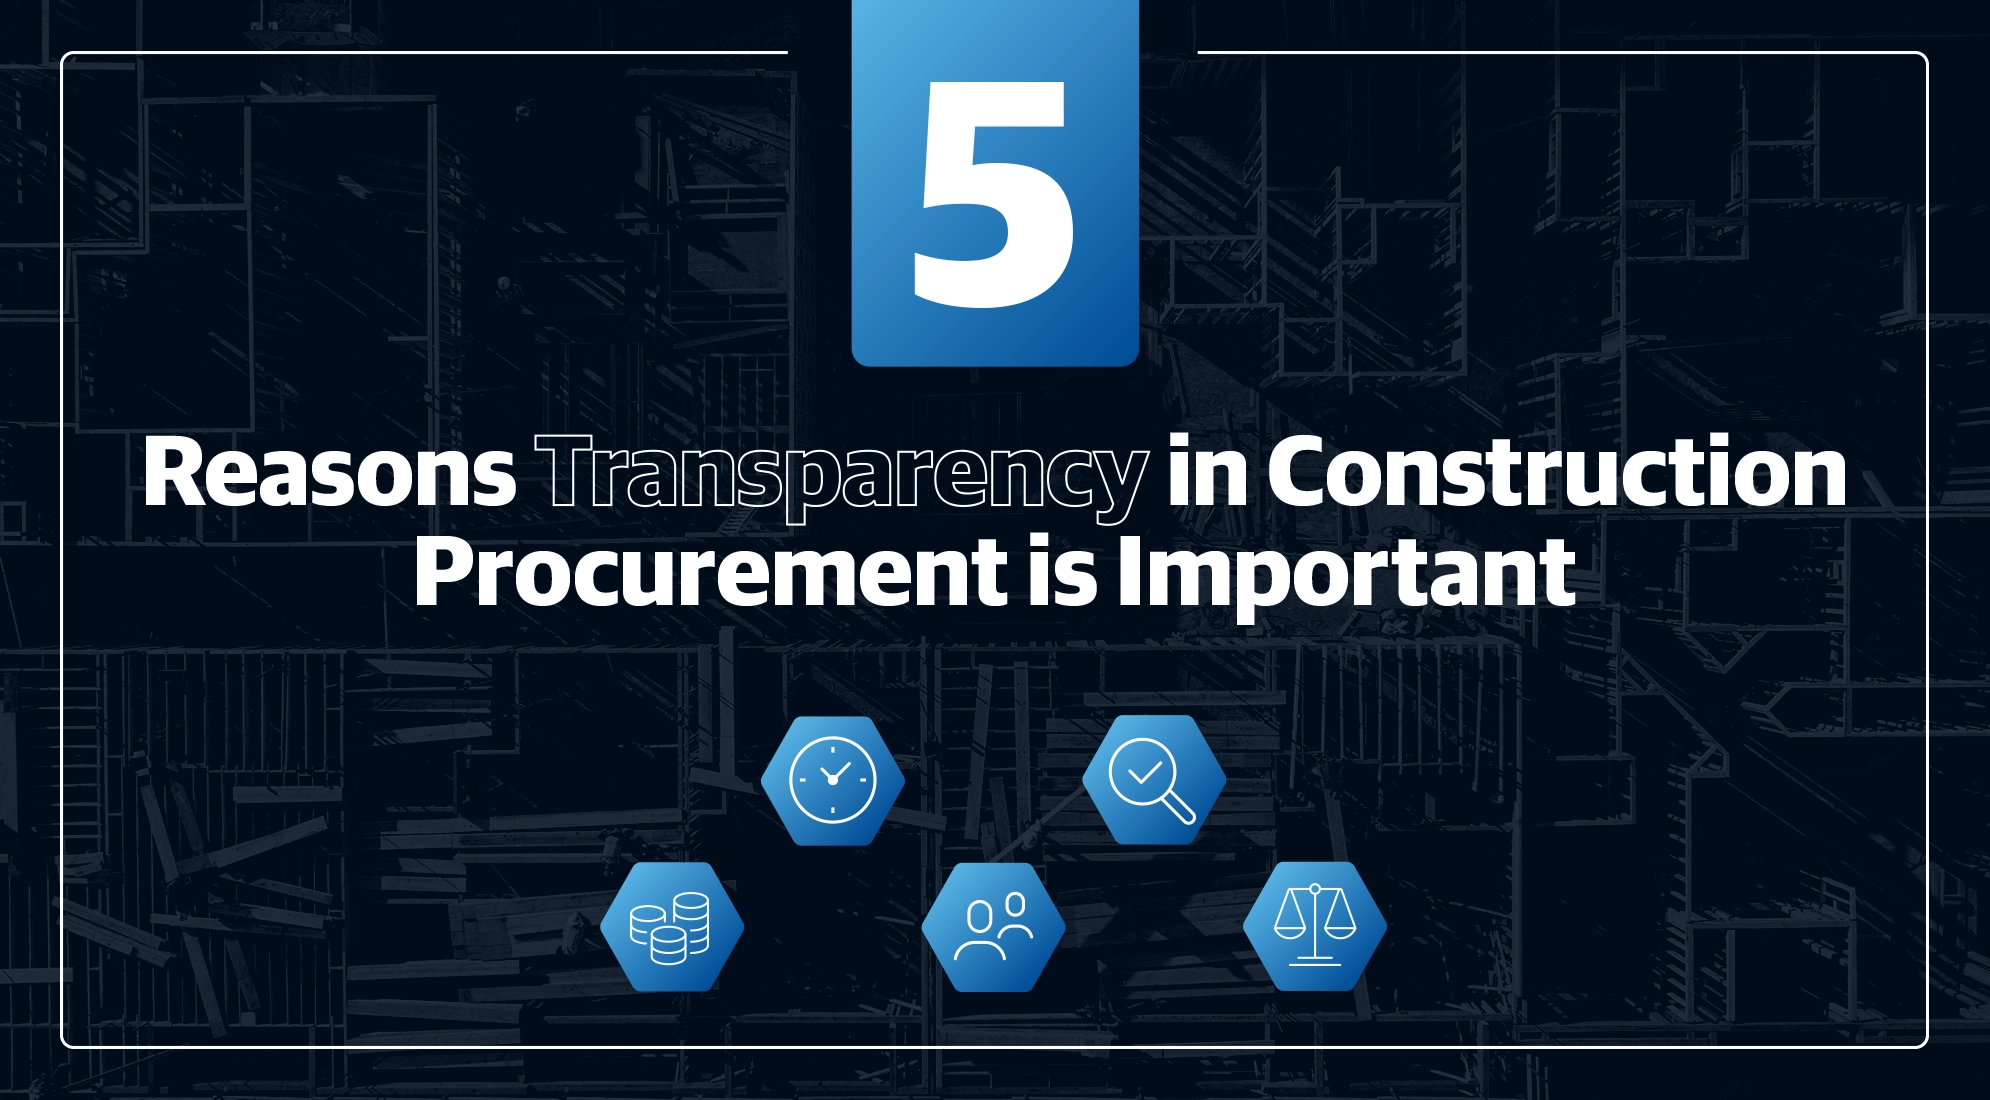 Reasons for Transparency in Construction Procurement